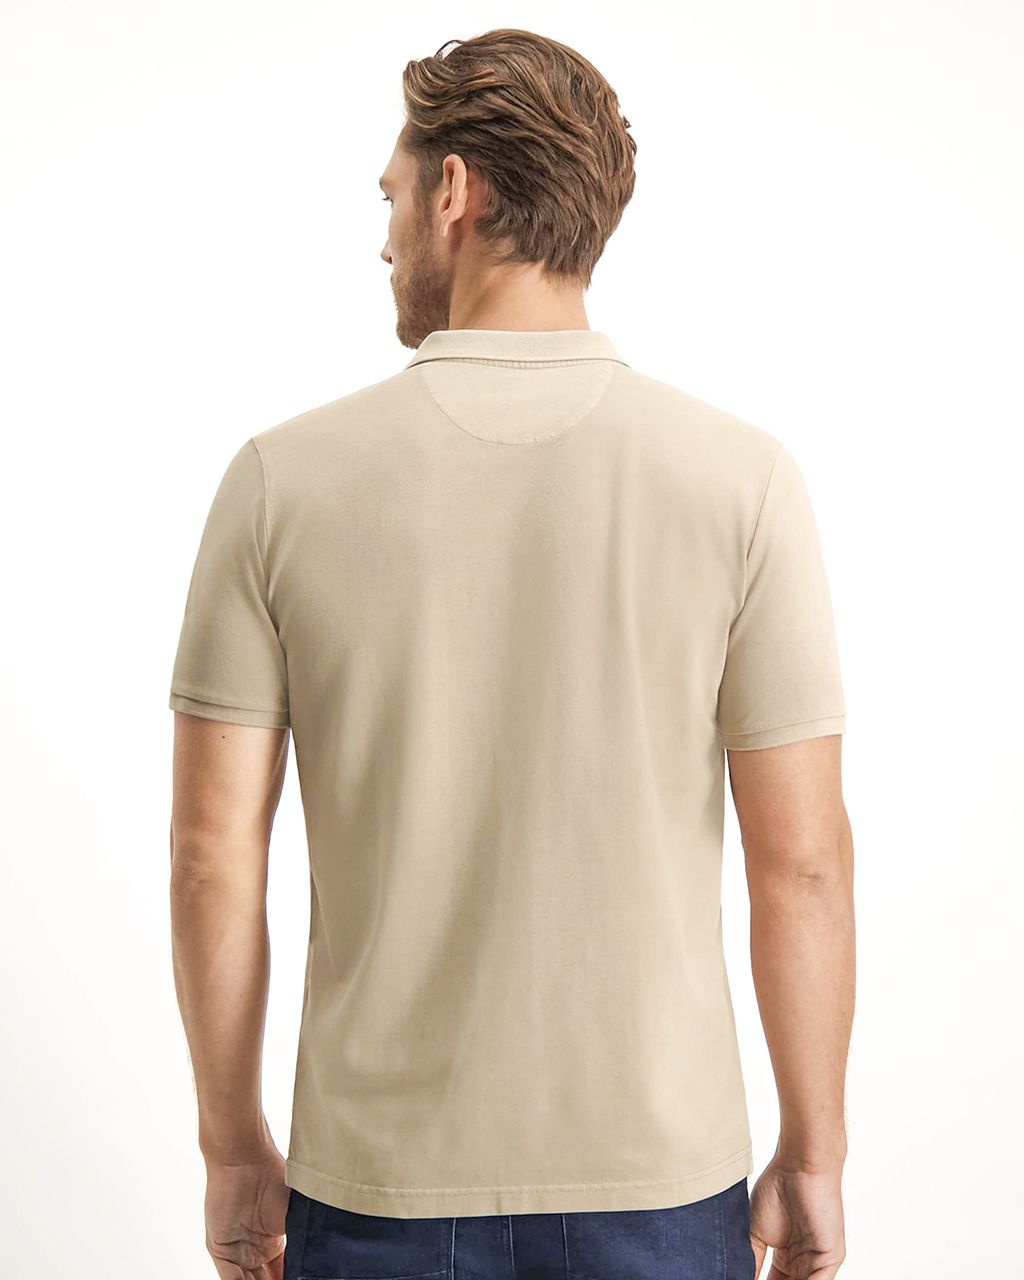 State of Art Polo KM Beige 075930-001-XL